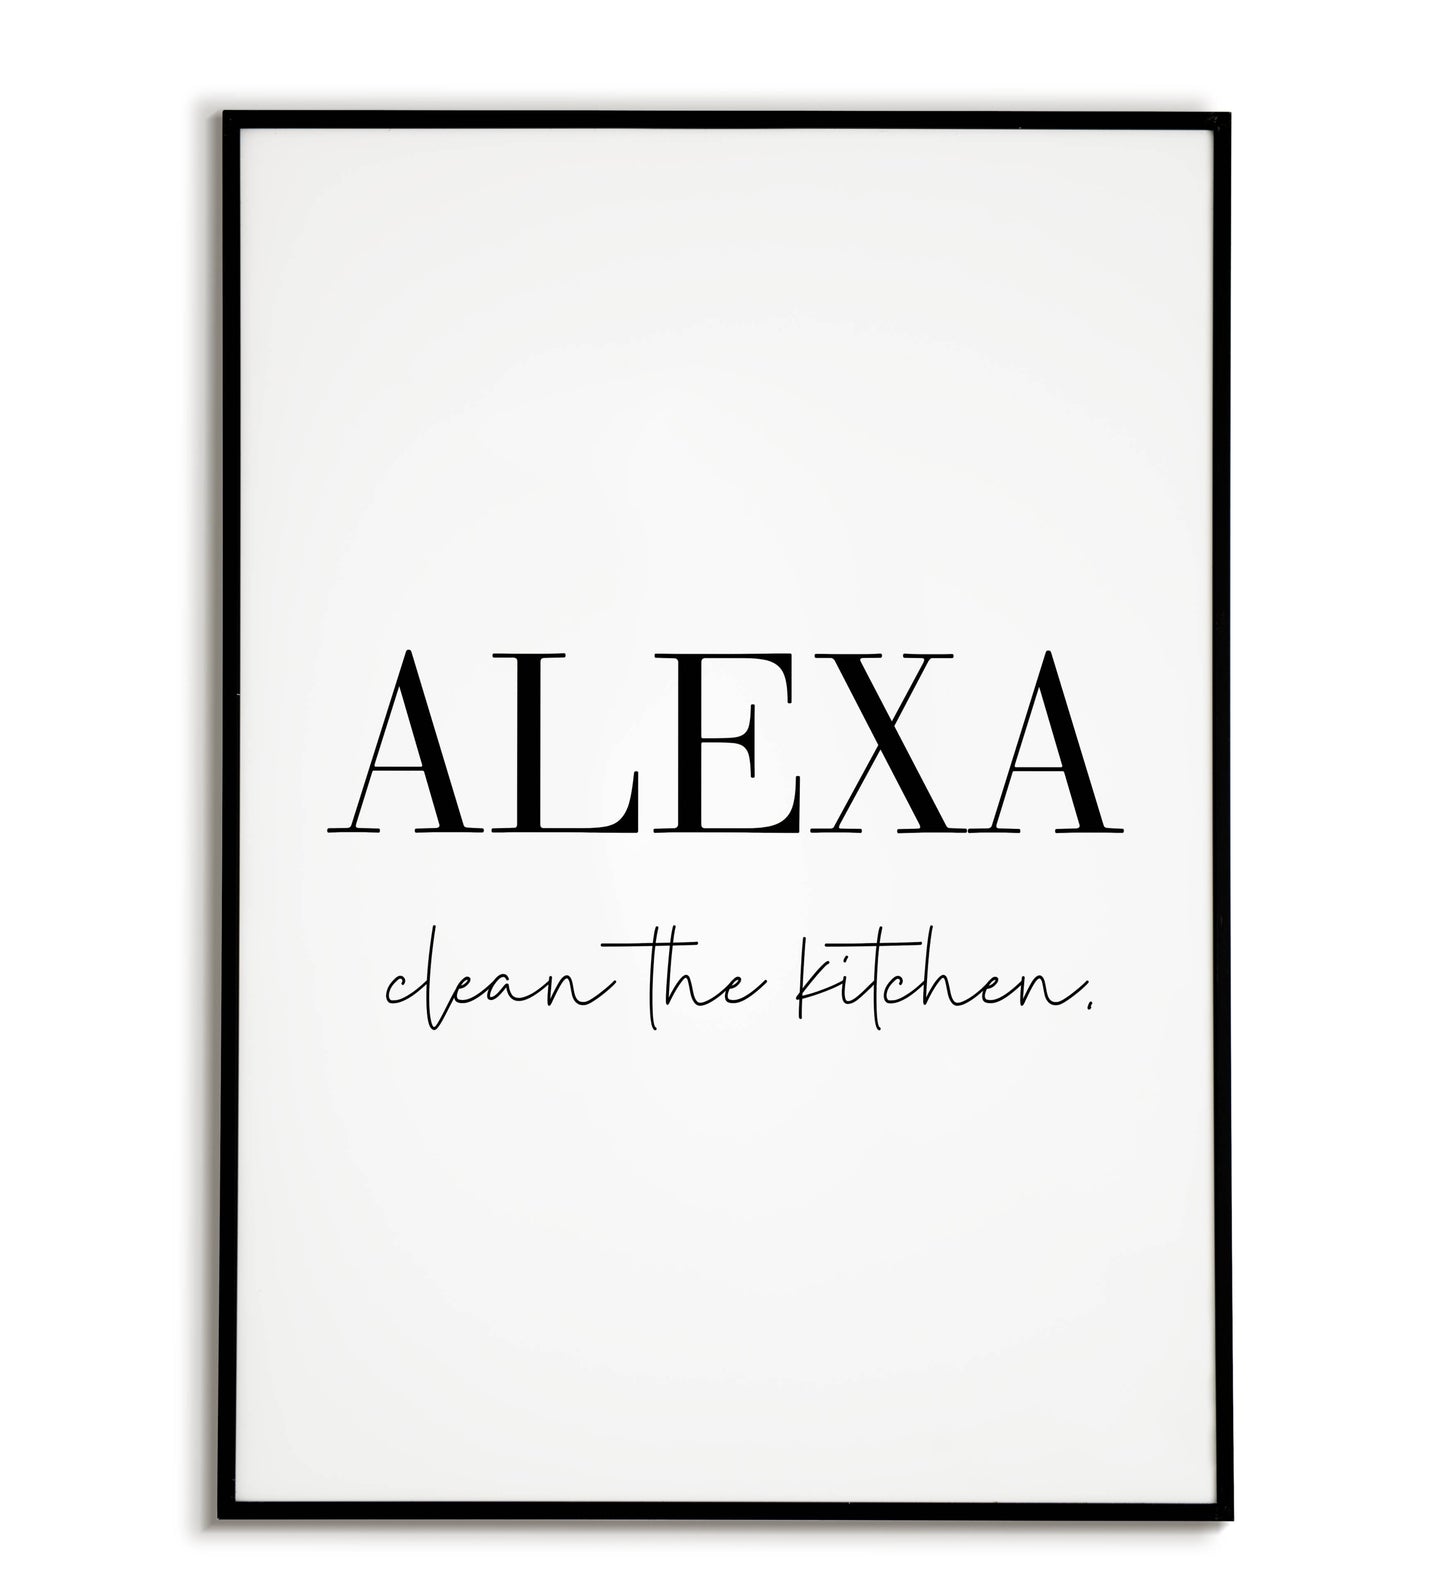 Humorous "ALEXA, clean the kitchen" printable poster, a lighthearted reminder for tech-savvy households.	